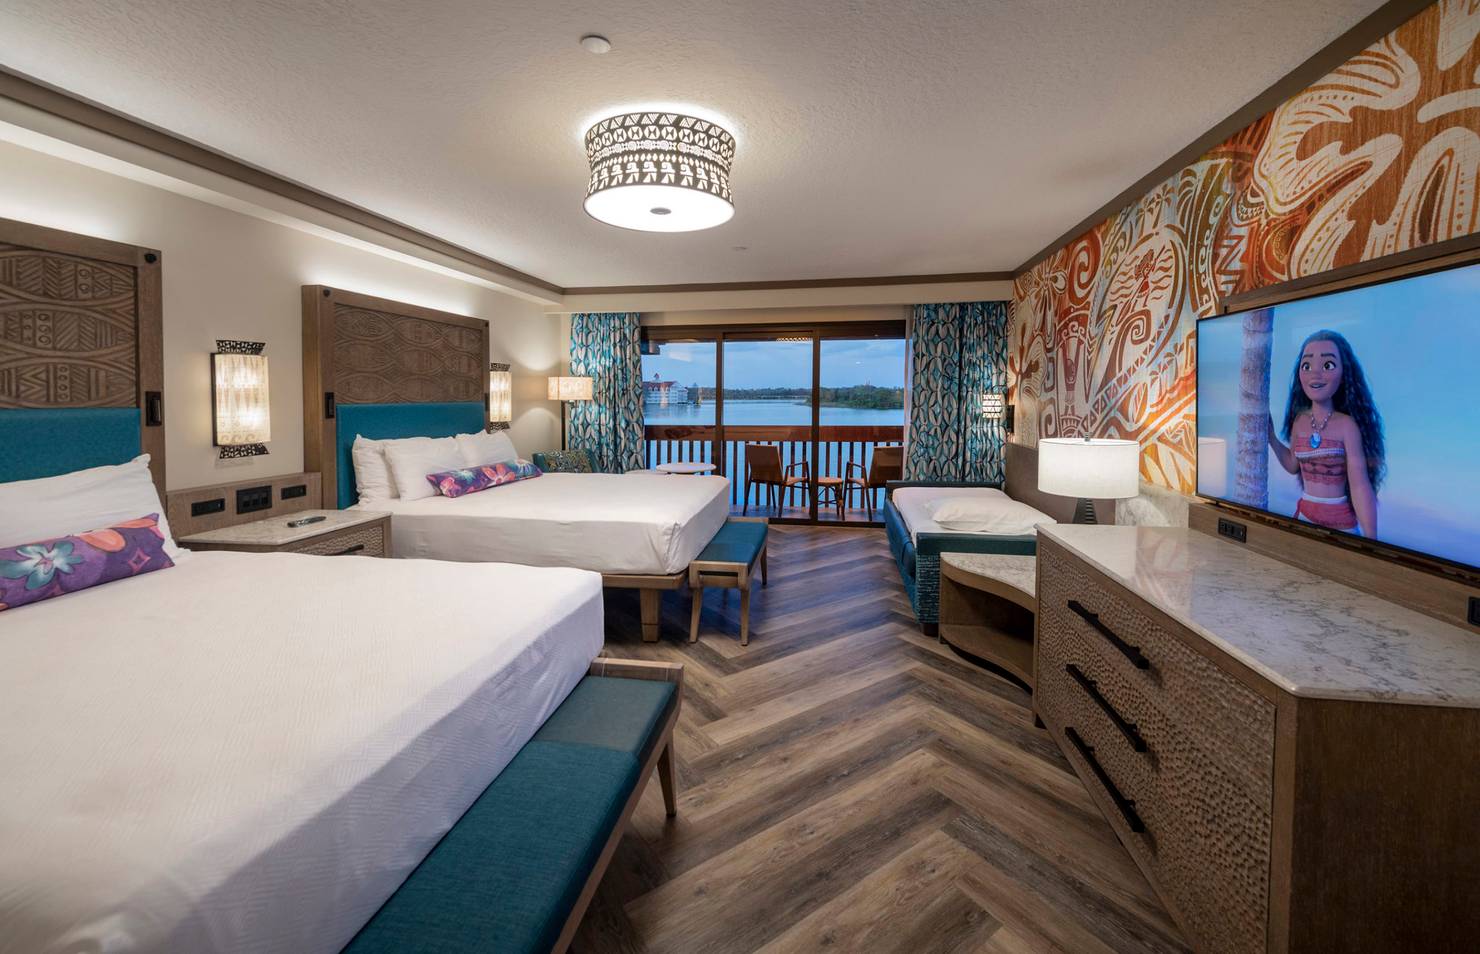 Disney's Polynesian Village Resort will reopen with new look rooms for arrivals to begin on July 19